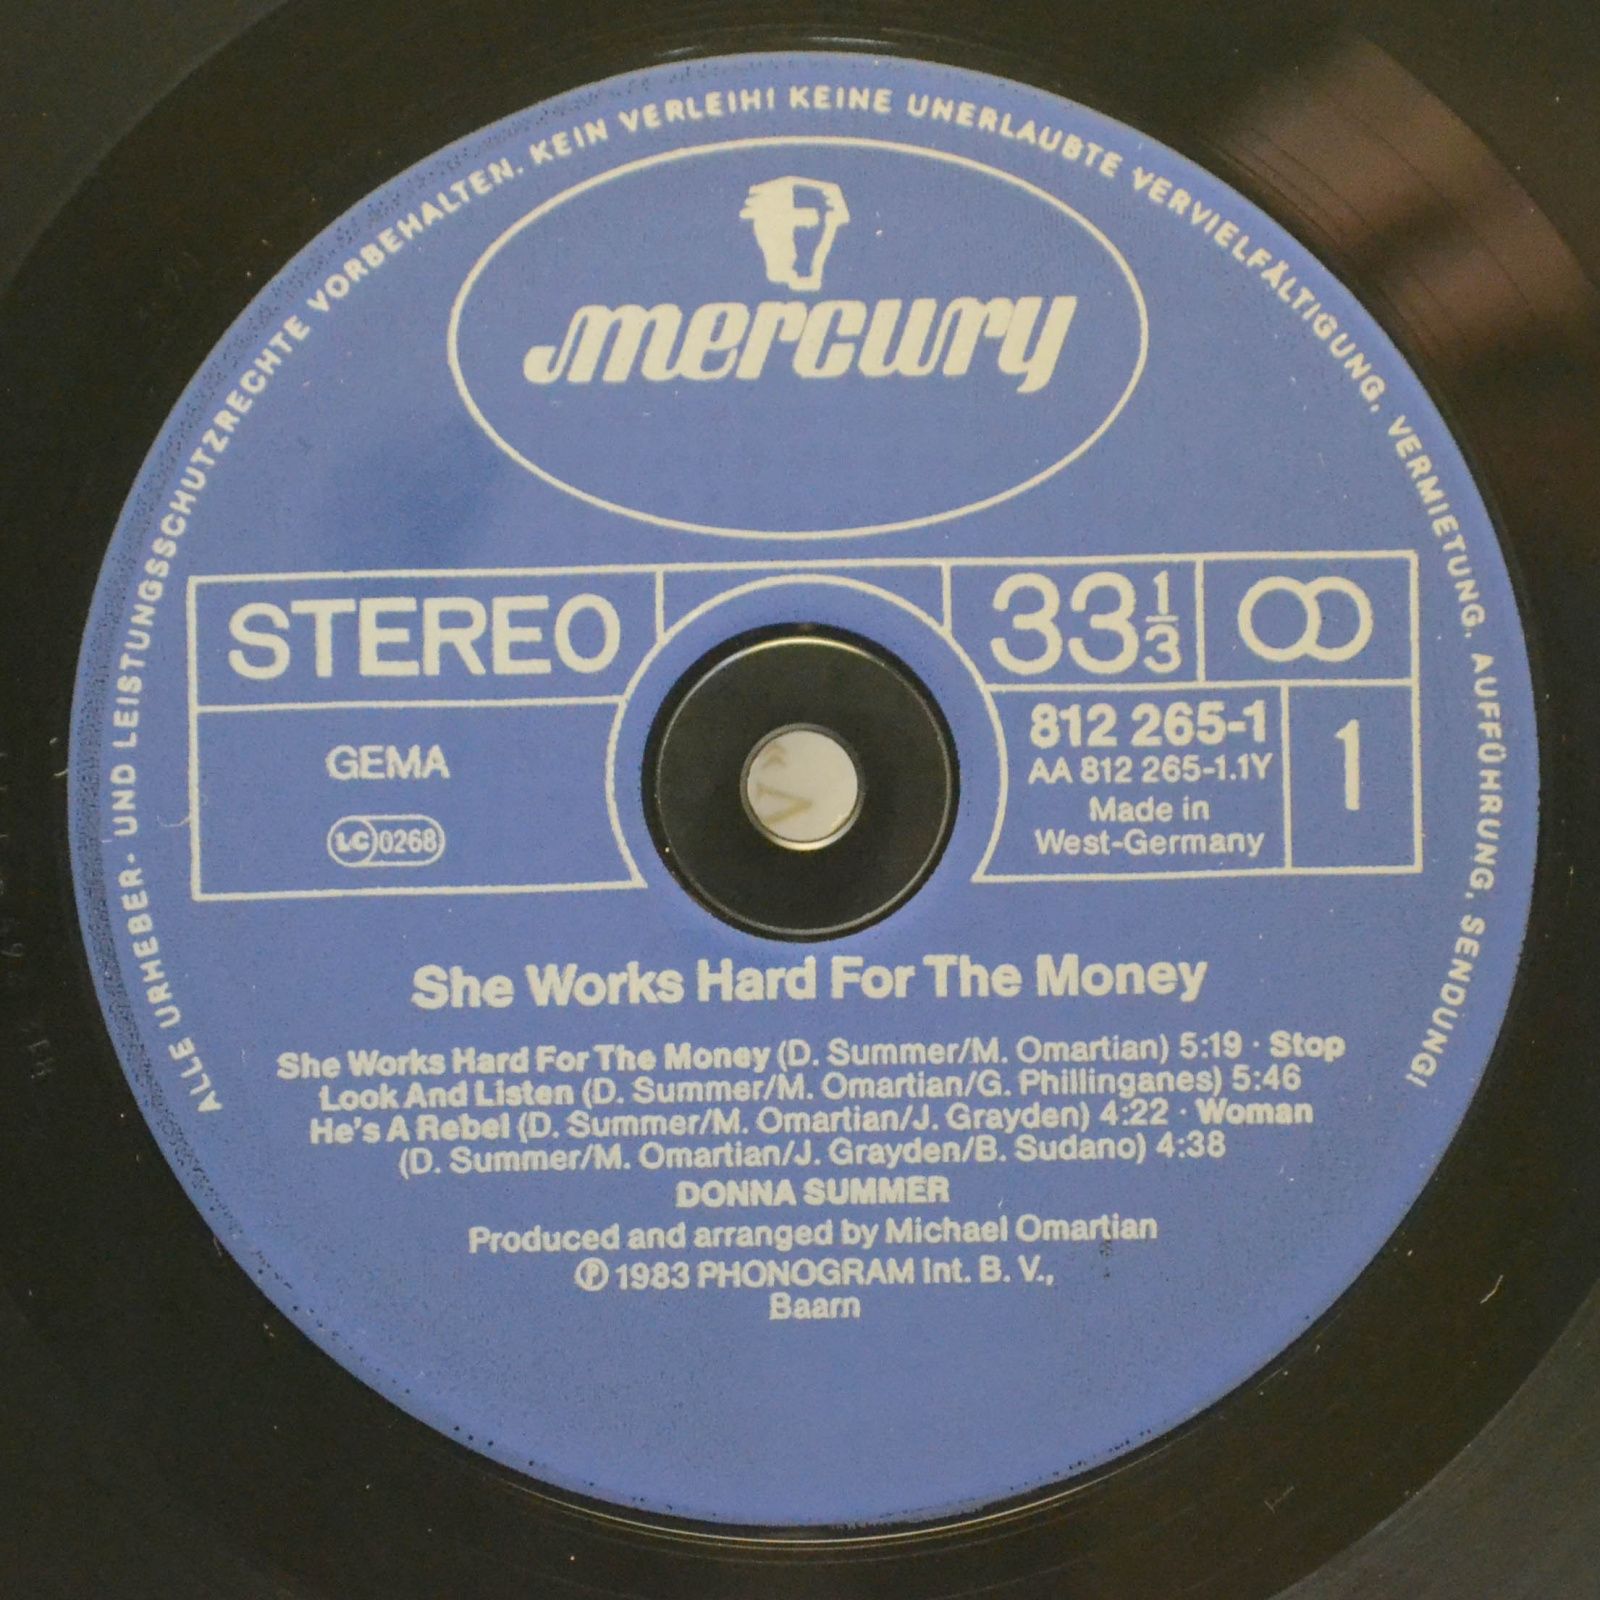 Donna Summer — She Works Hard For The Money, 1983